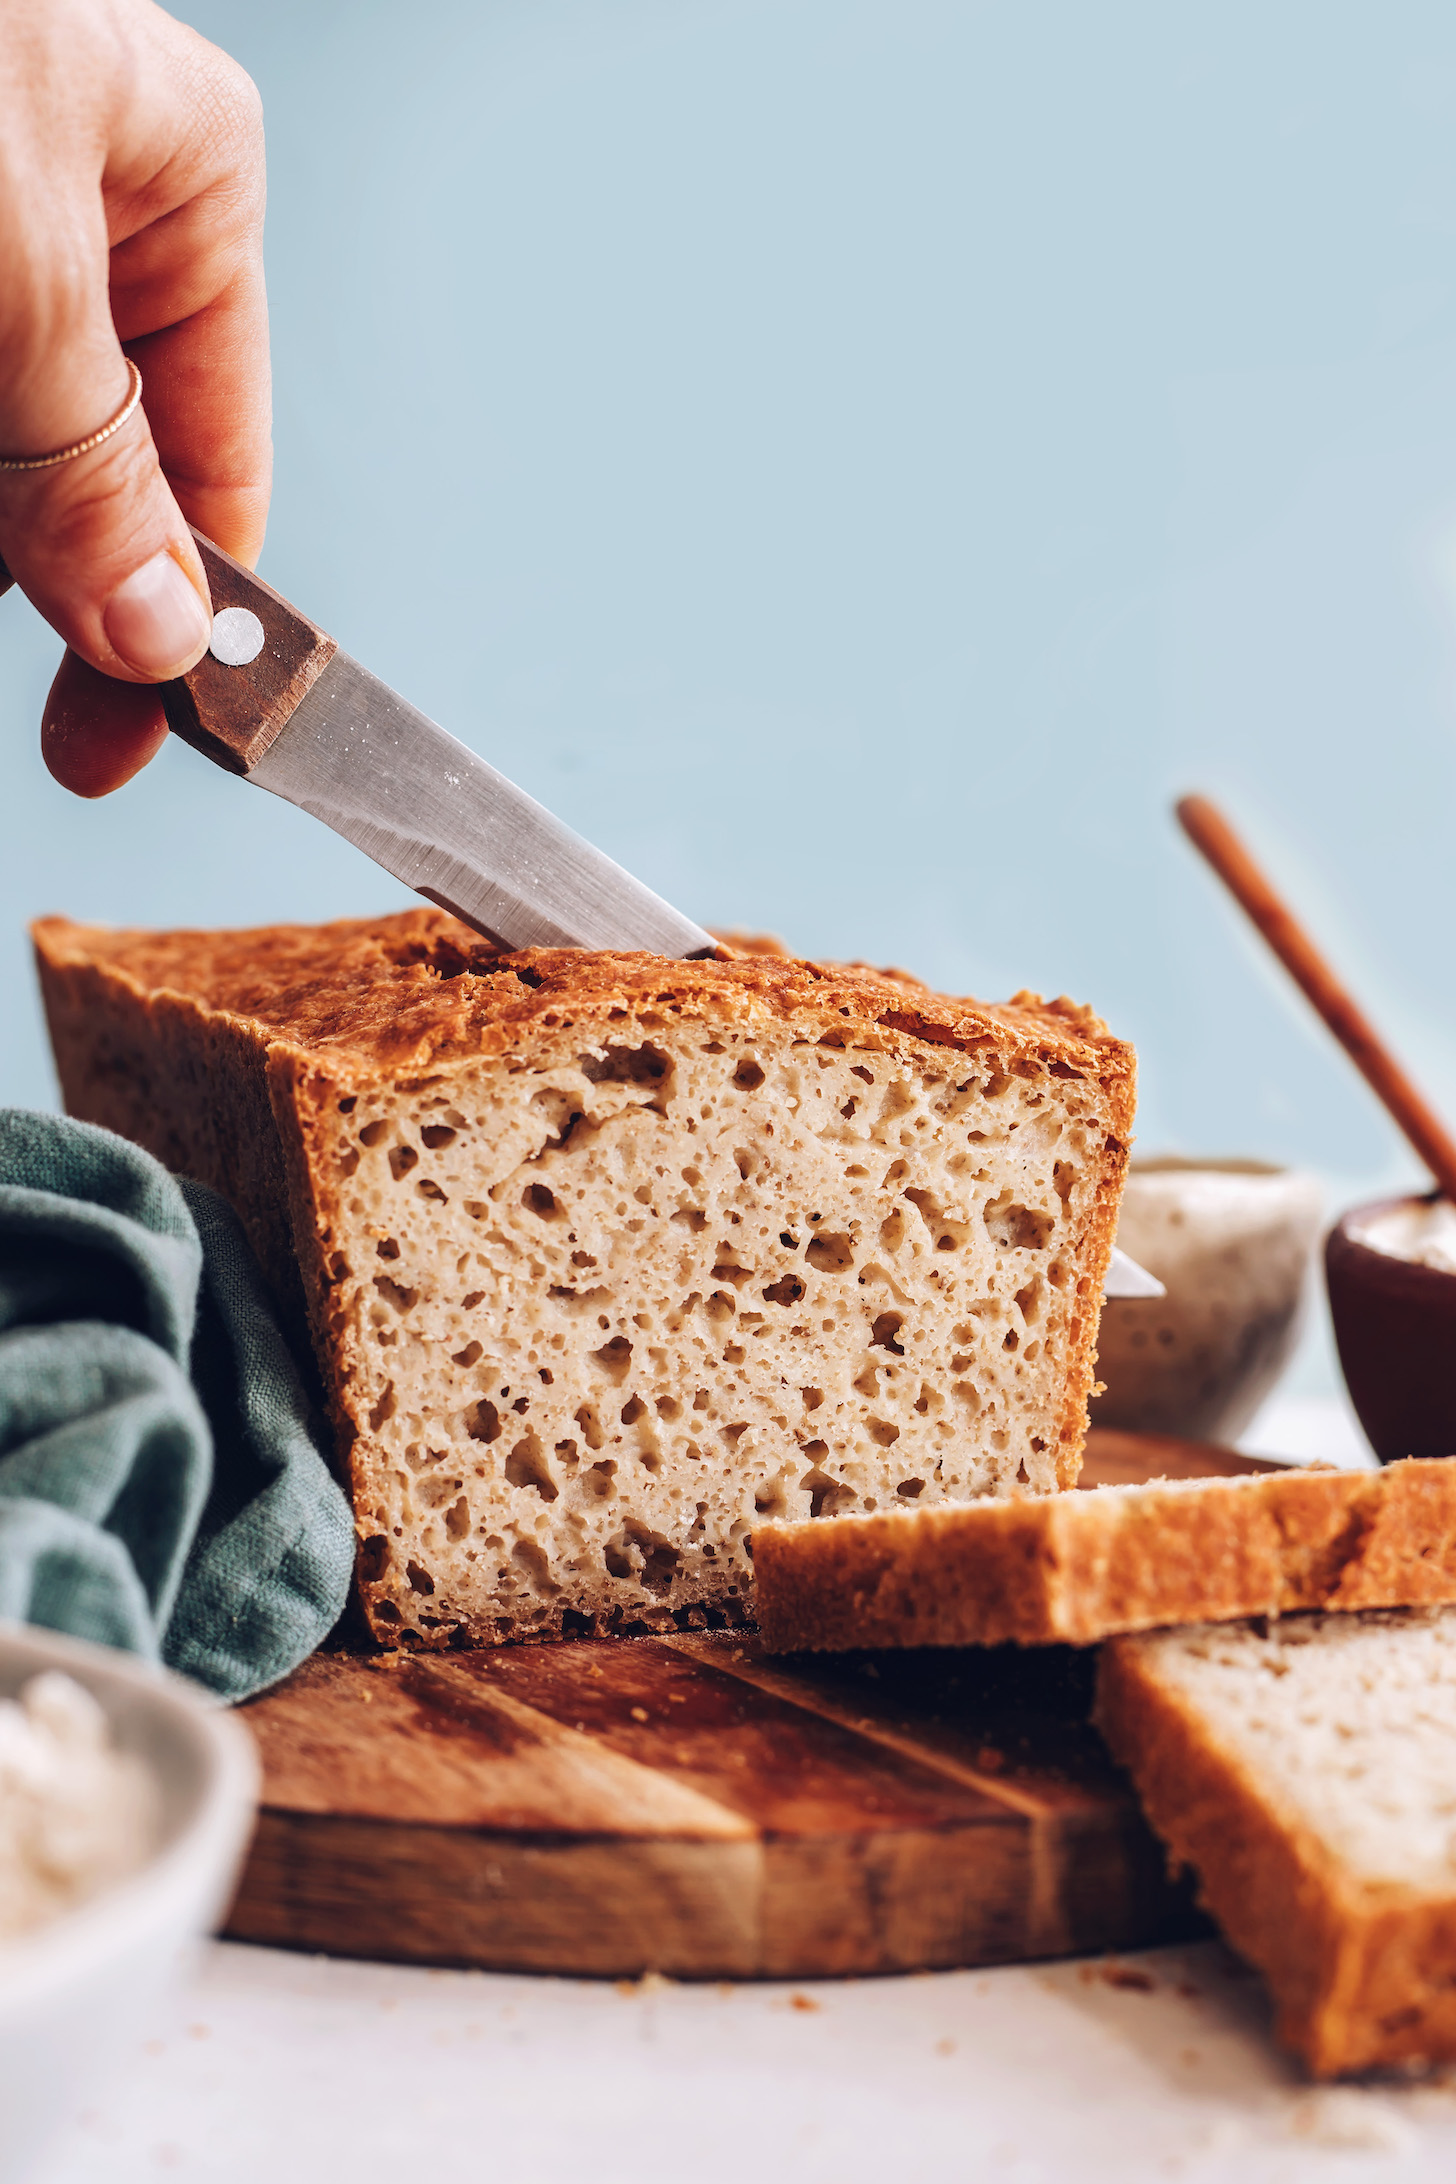 Slicing into a loaf of our gluten-free bread recipe